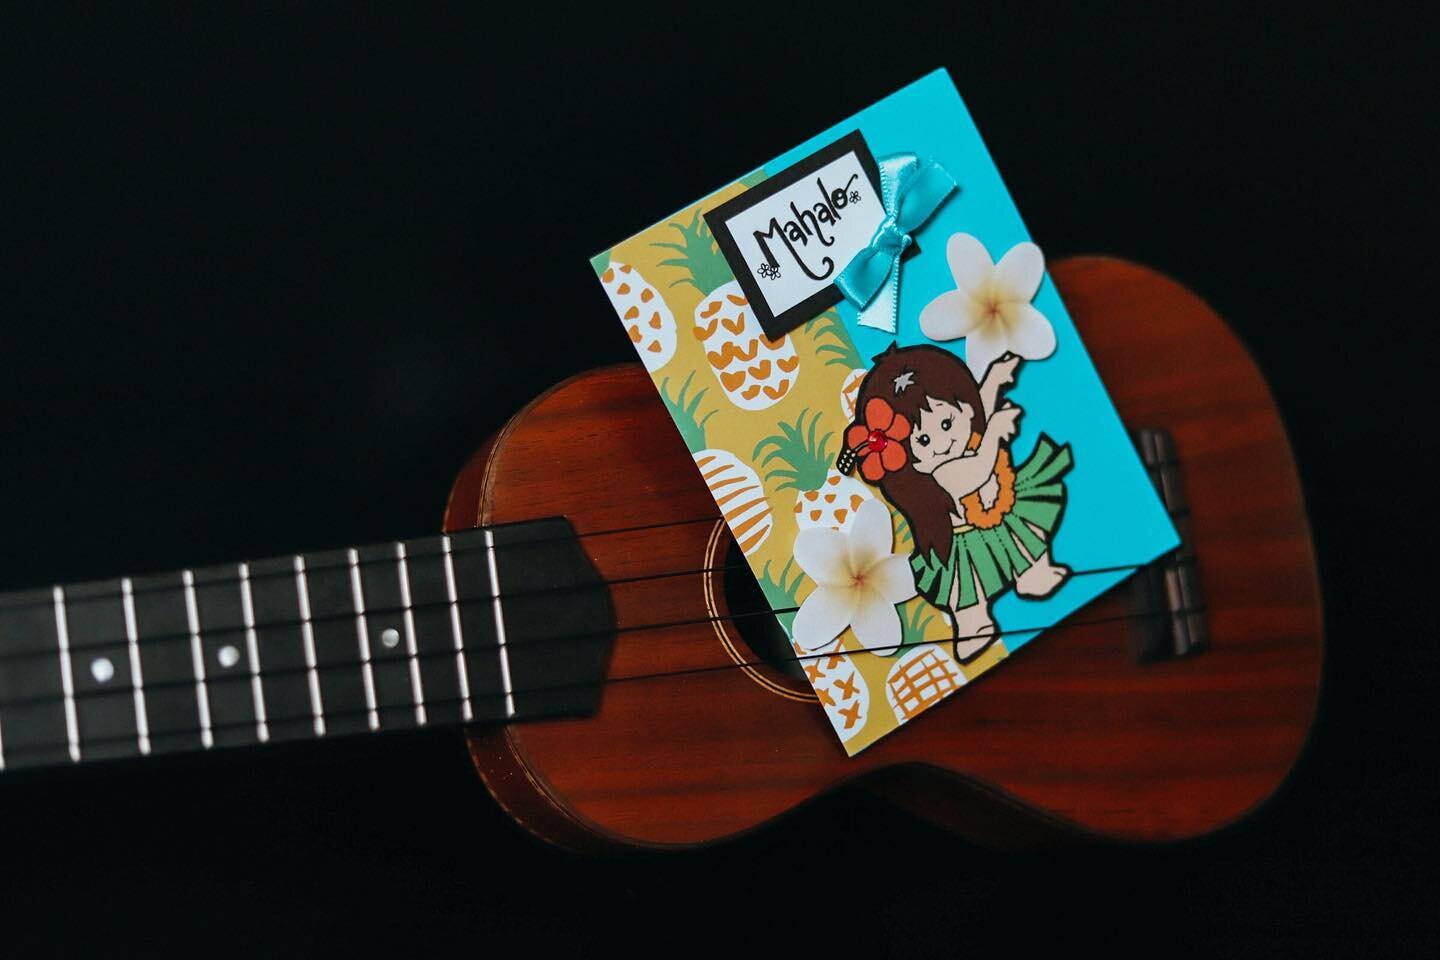 We just received this adorable thank you card from the sweet winner of a #MeleUkulele from this year&rsquo;s Roy Sakuma&rsquo;s Ukulele Festival! Hearing how excited people are about their #ukuleles really makes our hearts melt. This is why we do wha